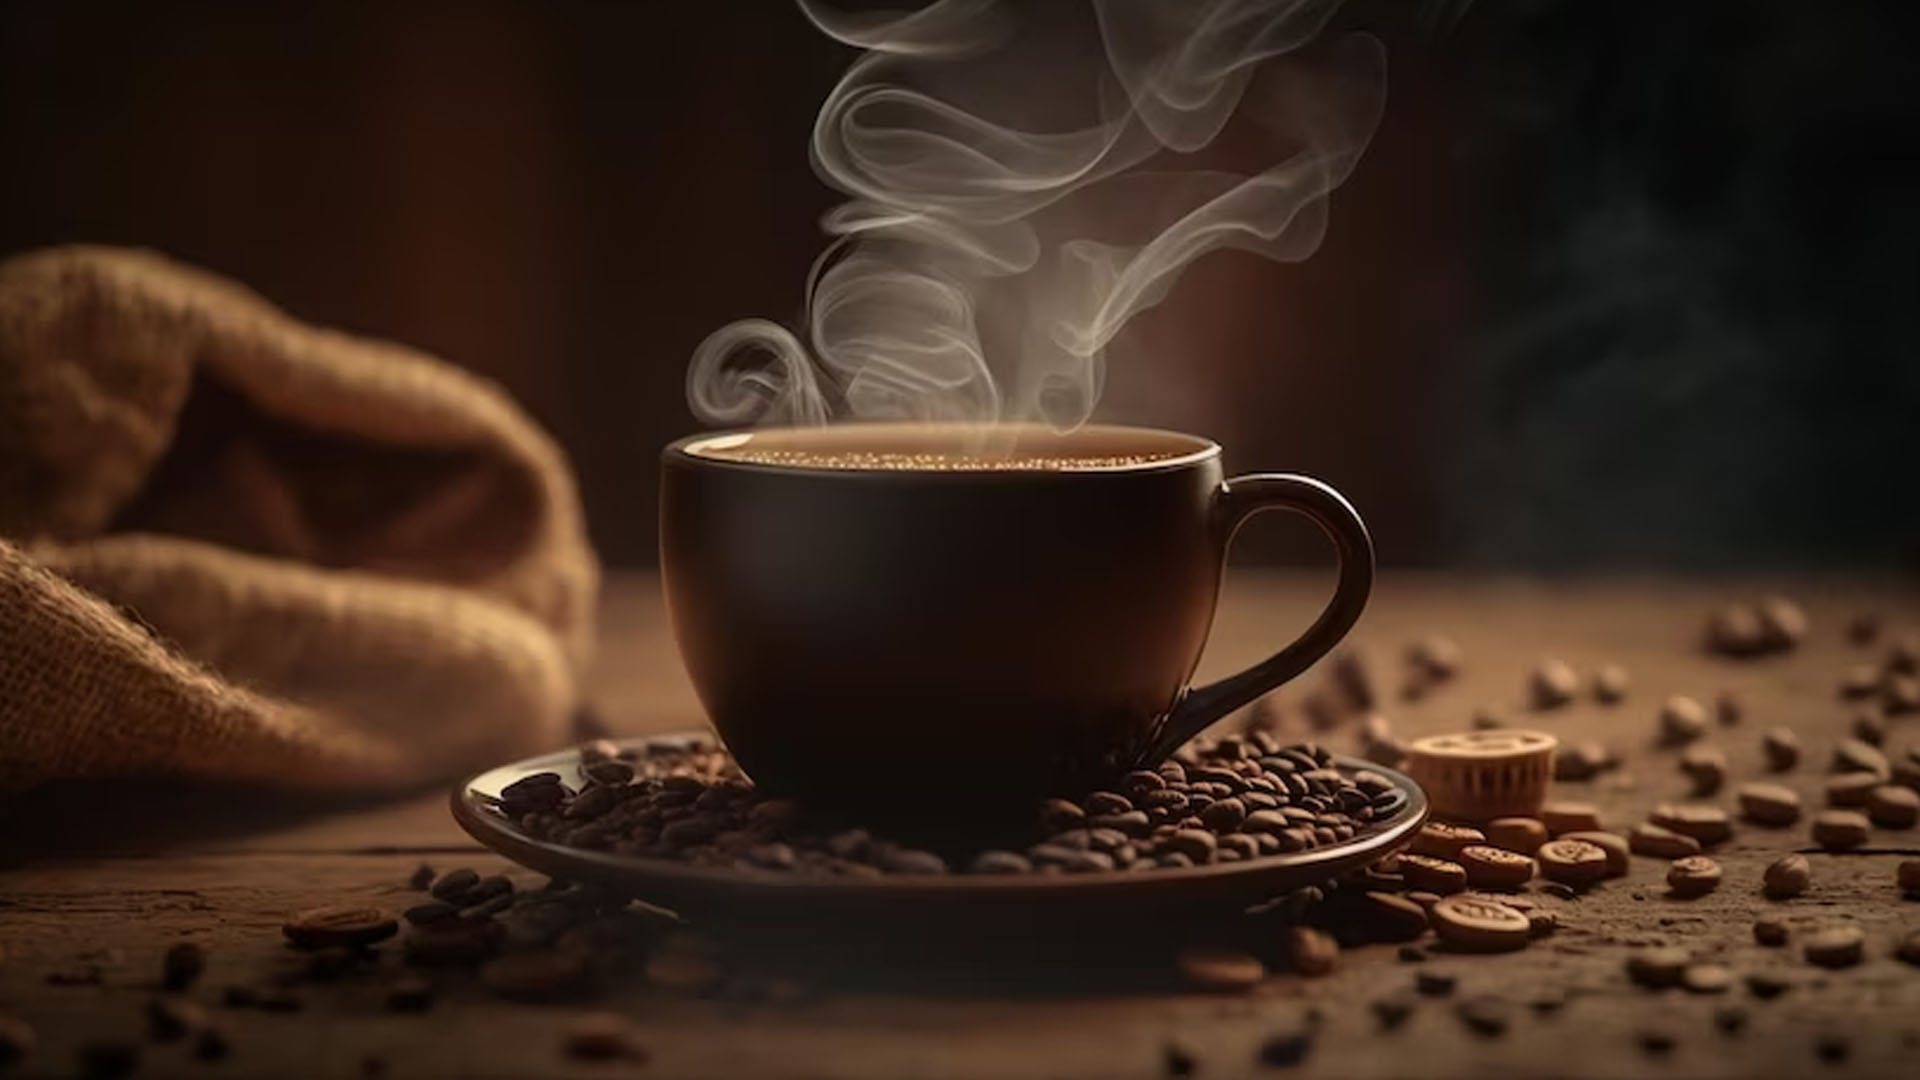 What Are The Health Benefits Of Coffee?